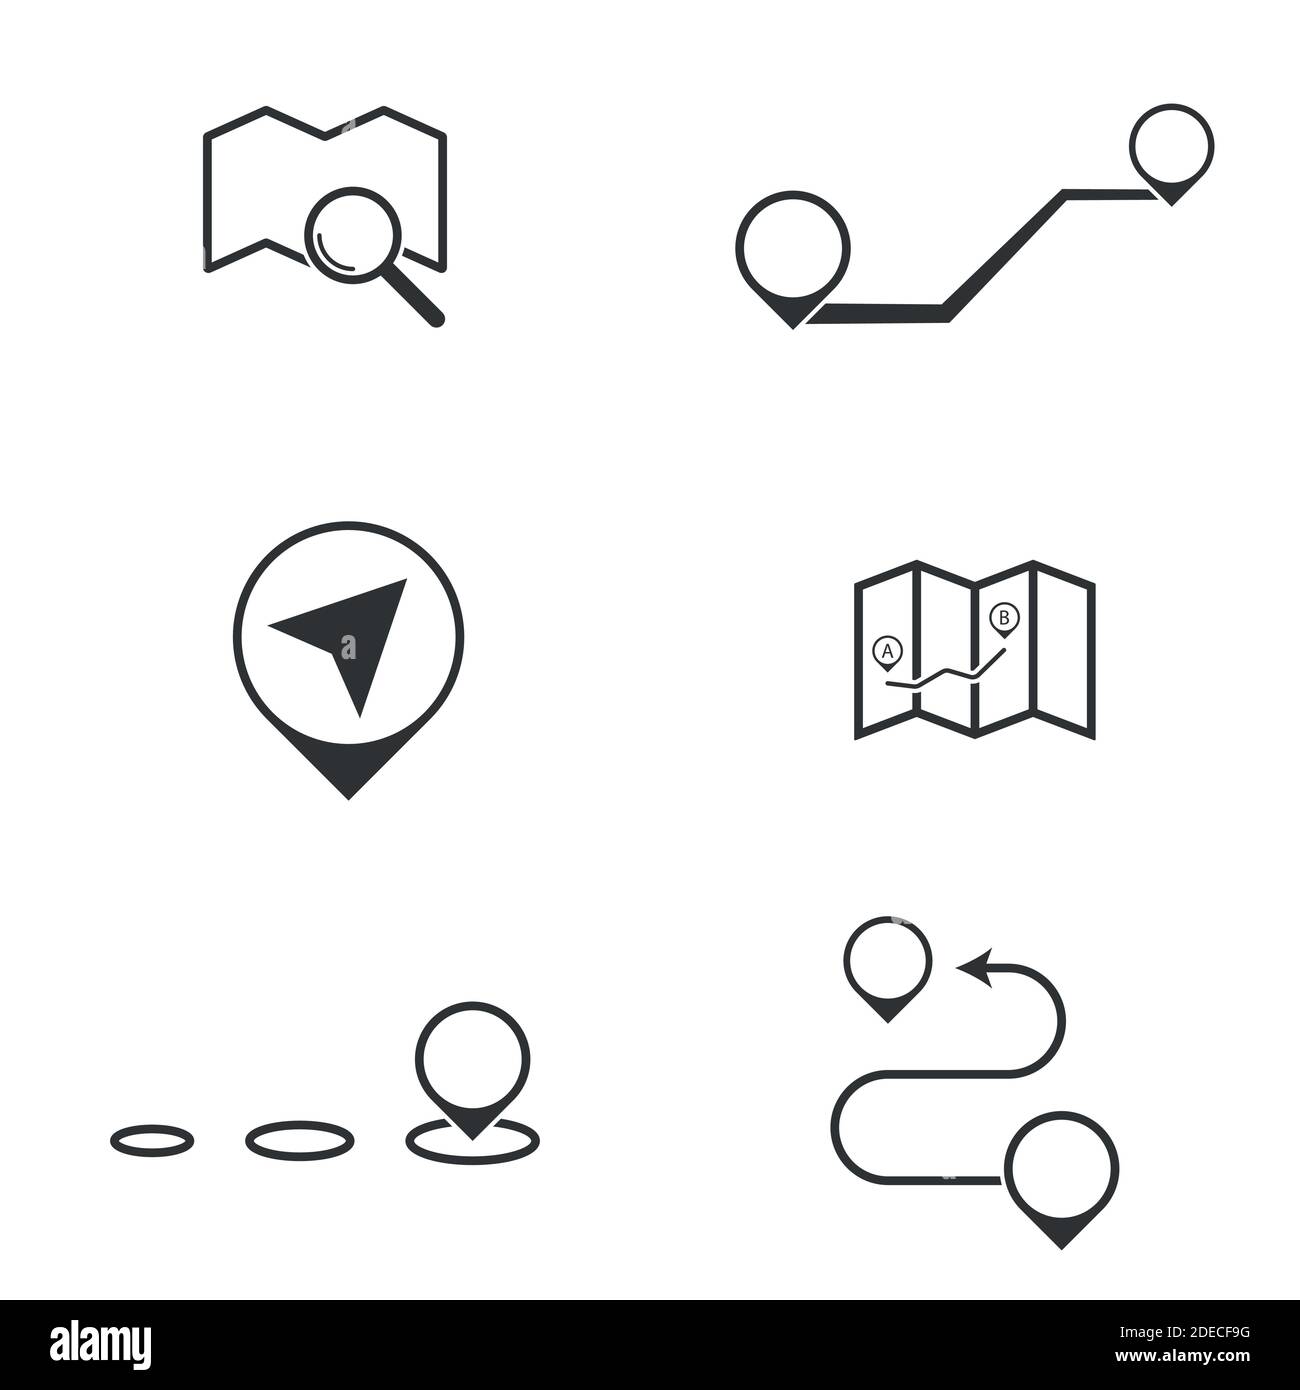 Set of black vector icons, isolated against white background. Flat illustration on a theme Map and Location Stock Vector